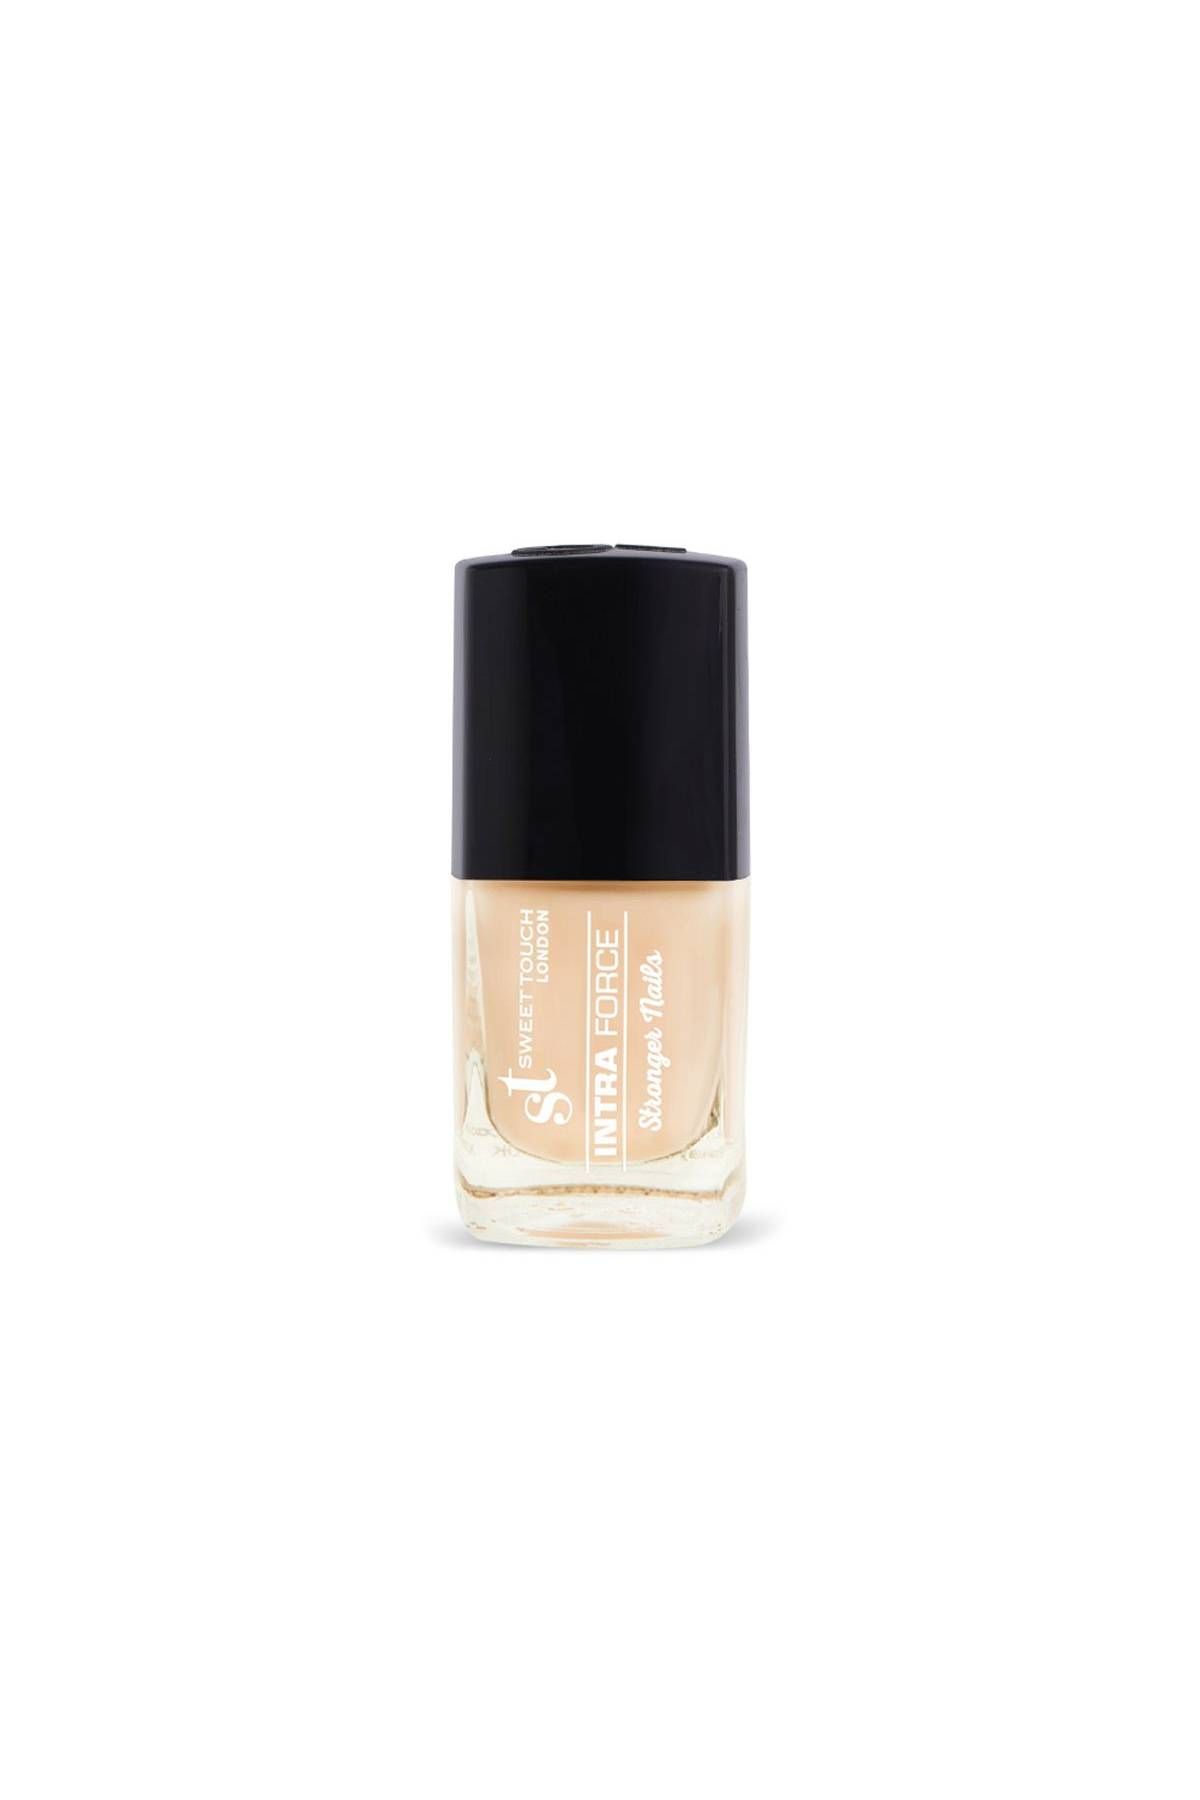 ST London - Nail Treatment - 095 - Intra Force